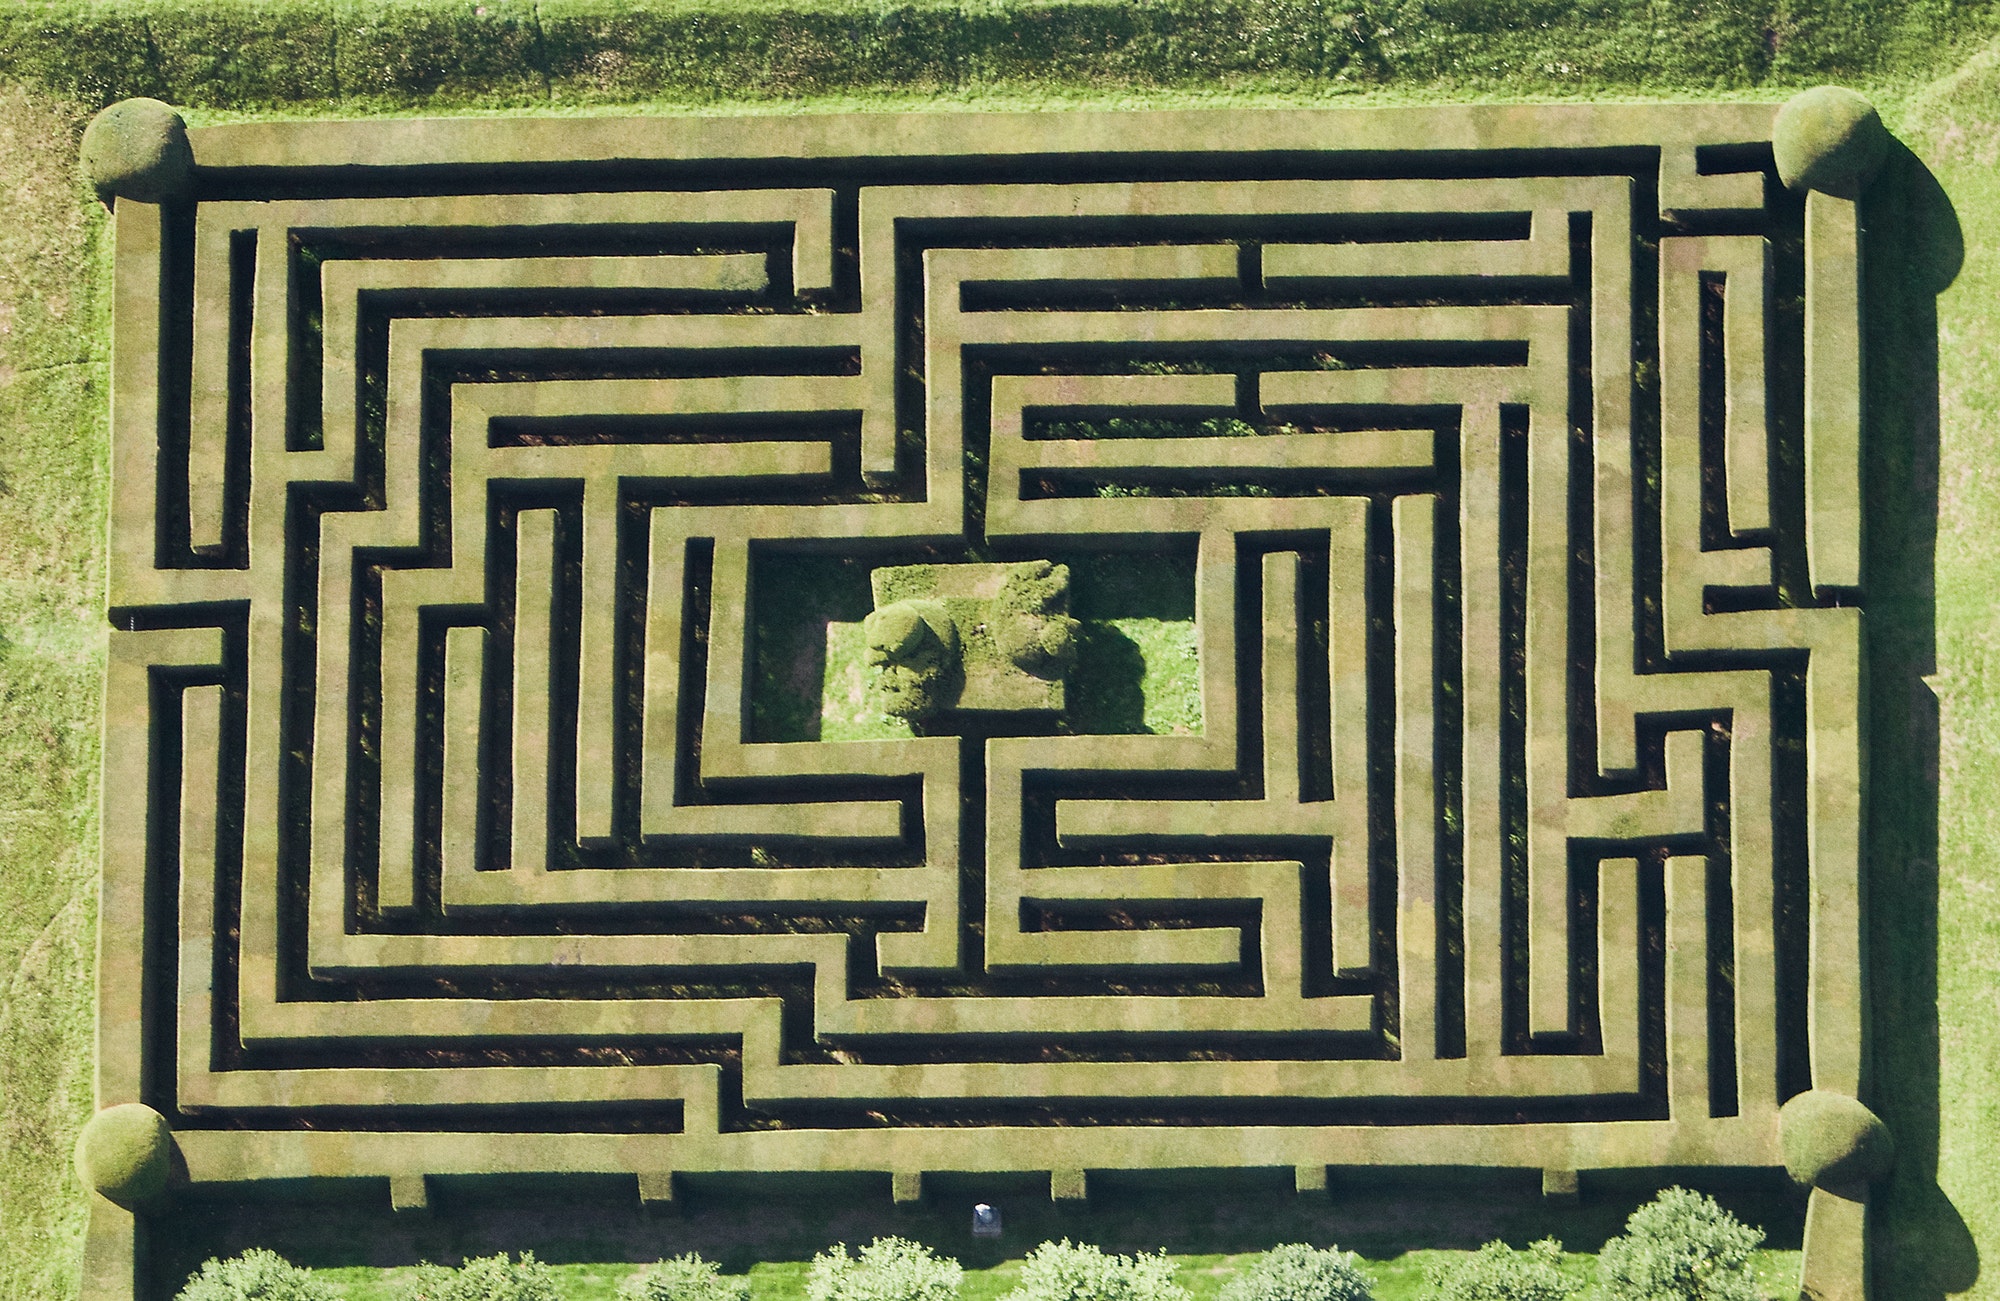 Aerial view of hedge maze